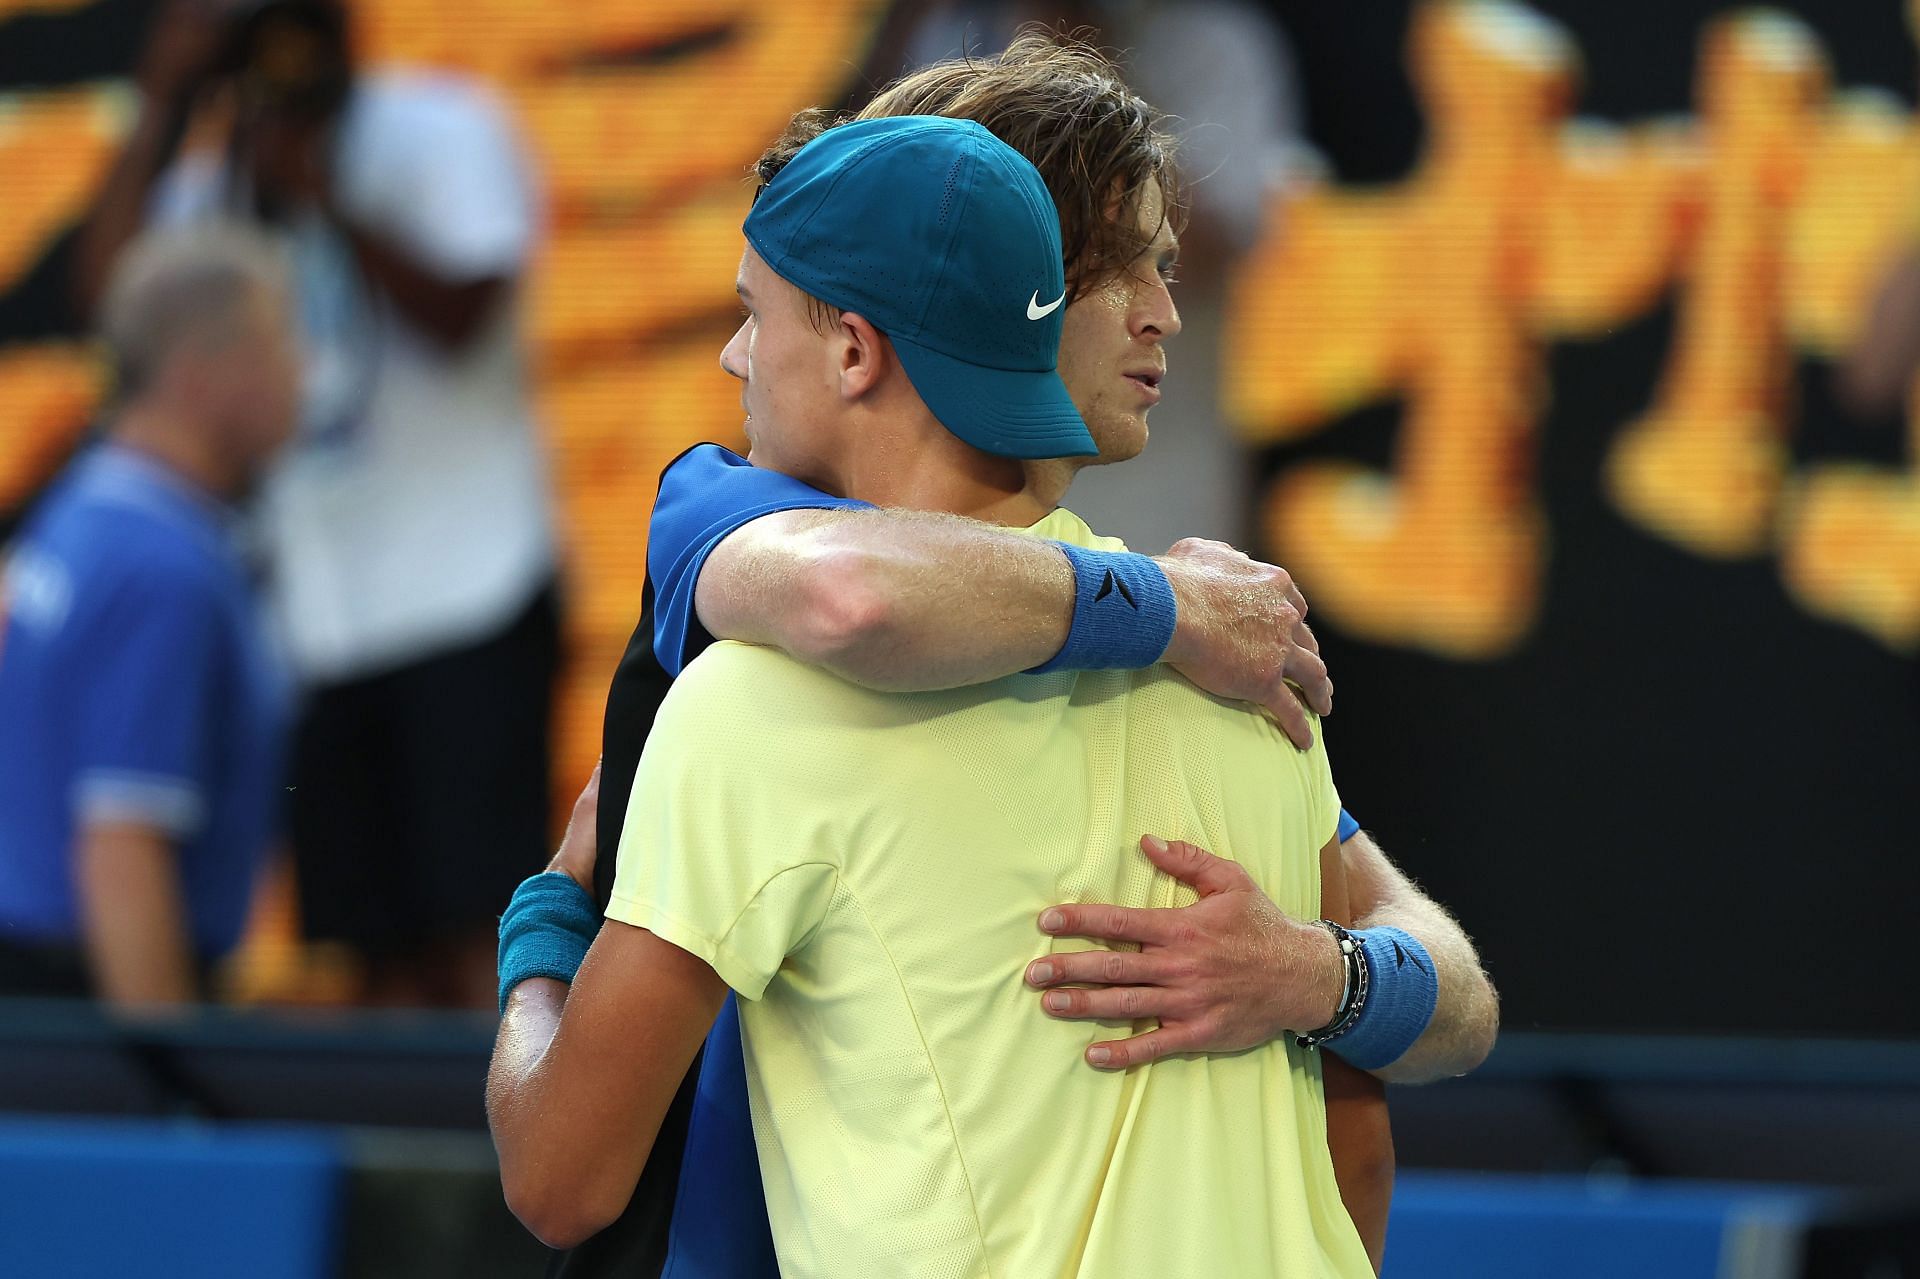 Andrey Rublev and Holger Rune hugged after their match